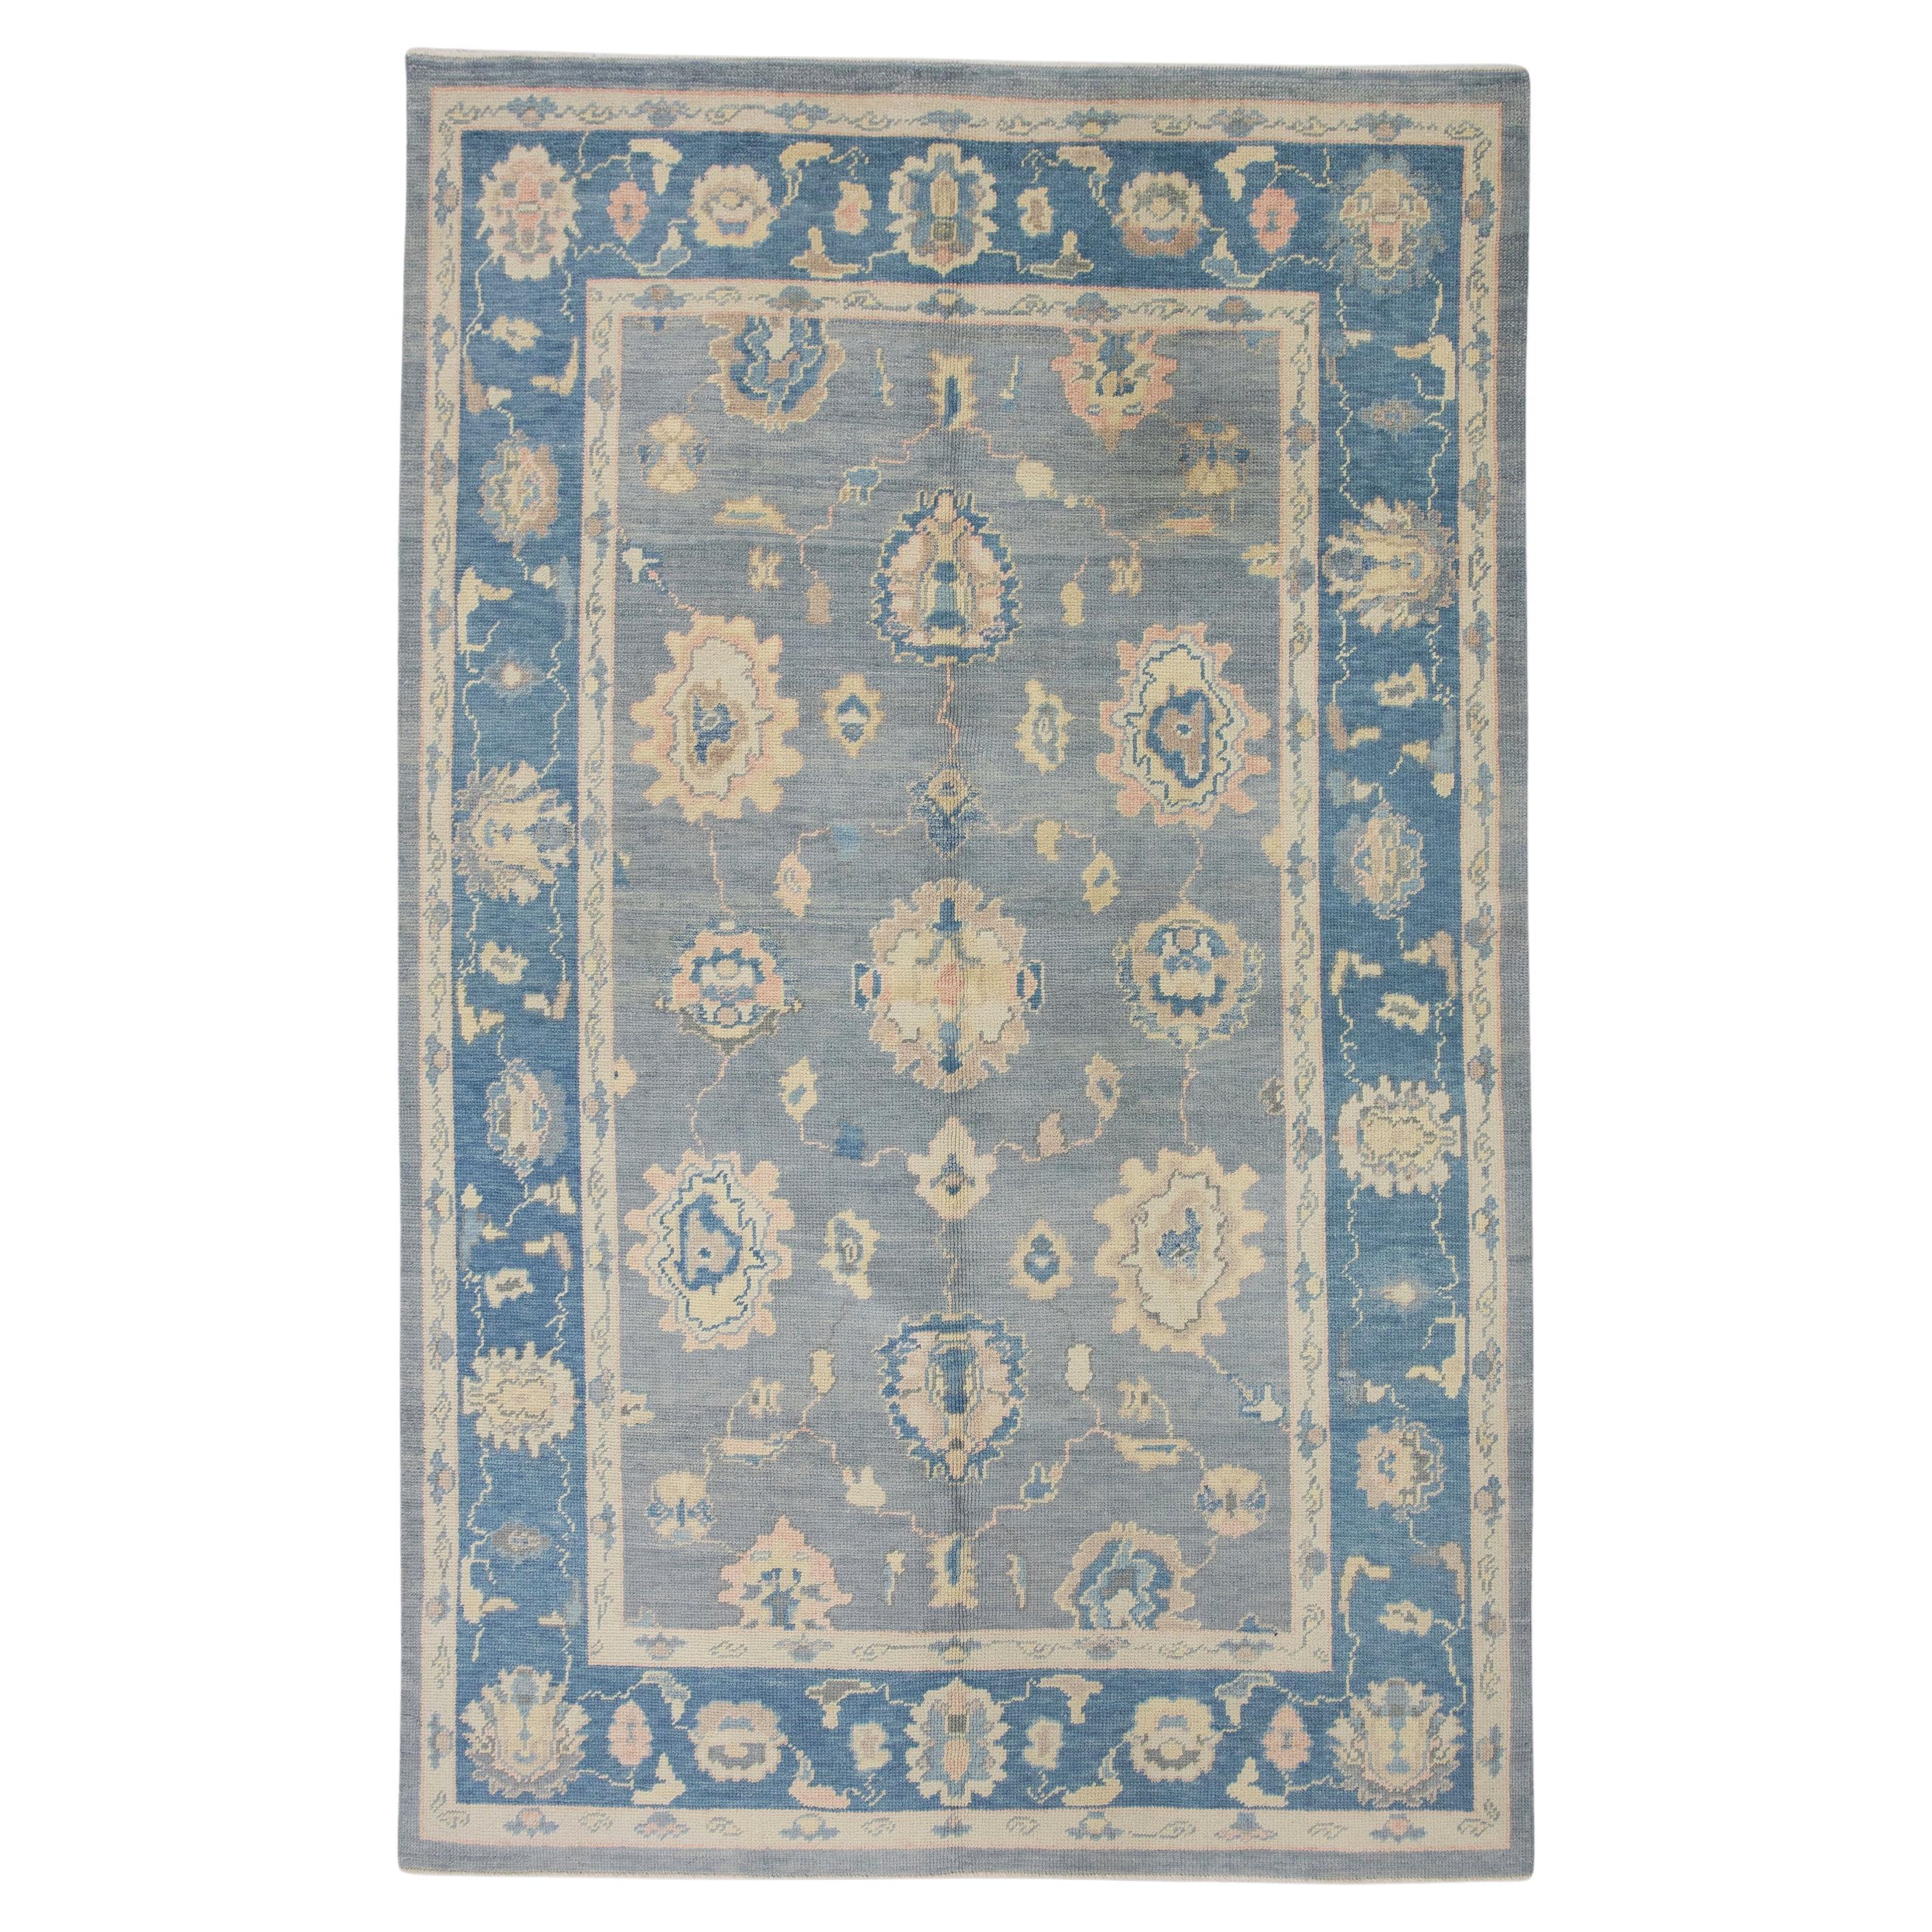 Blue and Pink Floral Handwoven Wool Turkish Oushak Rug 6'2" x 9'11"